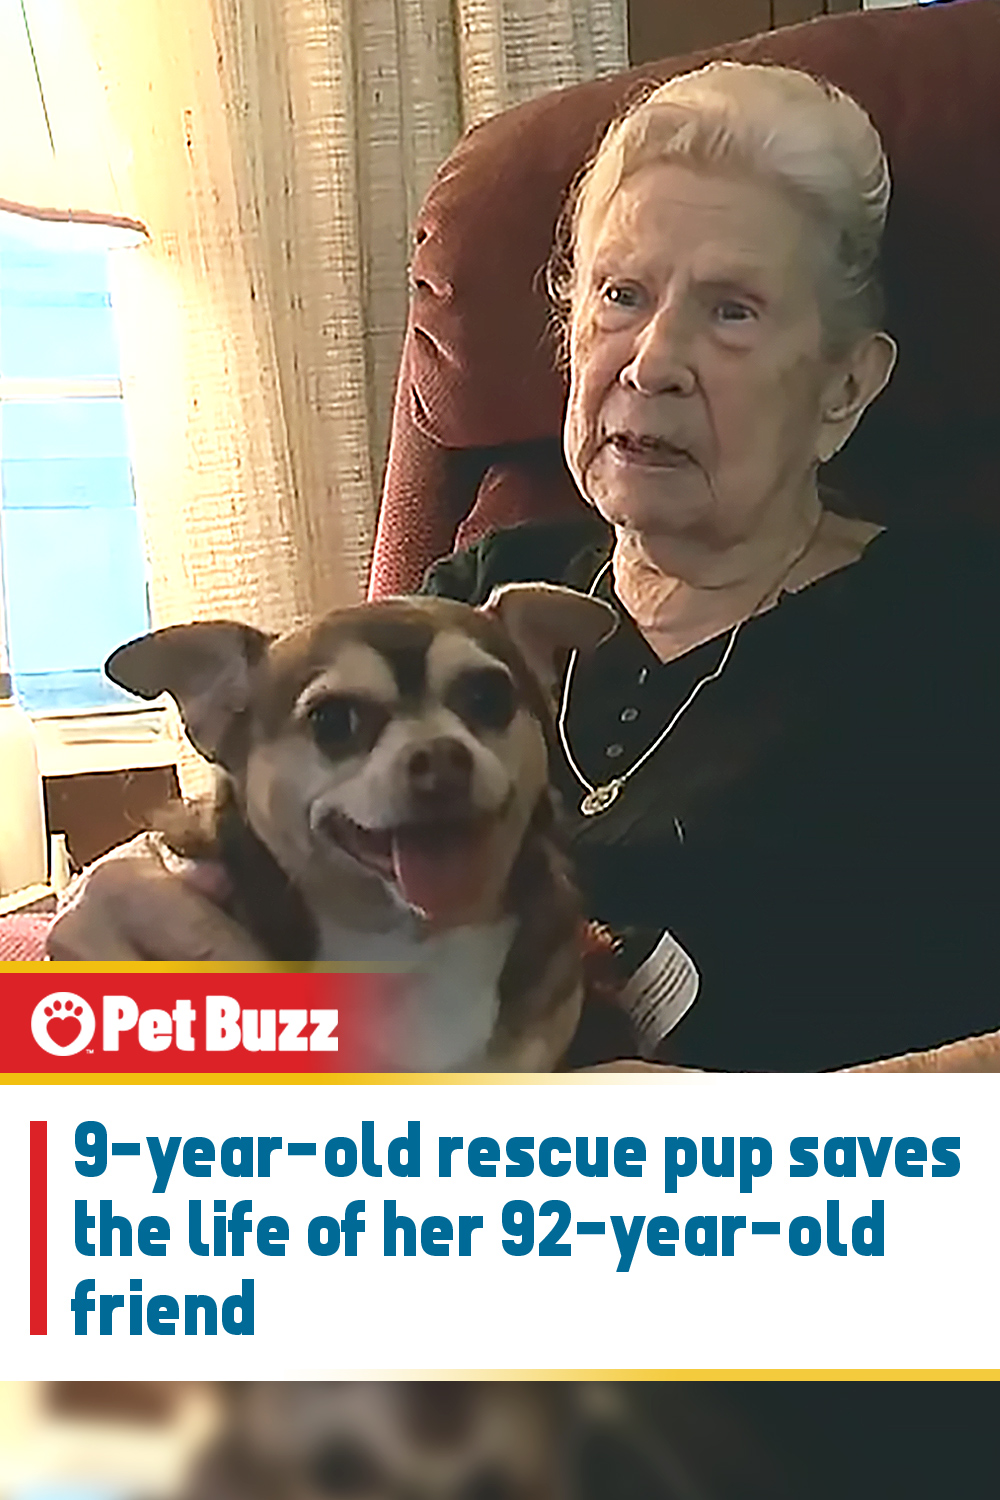 9-year-old rescue pup saves the life of her 92-year-old friend